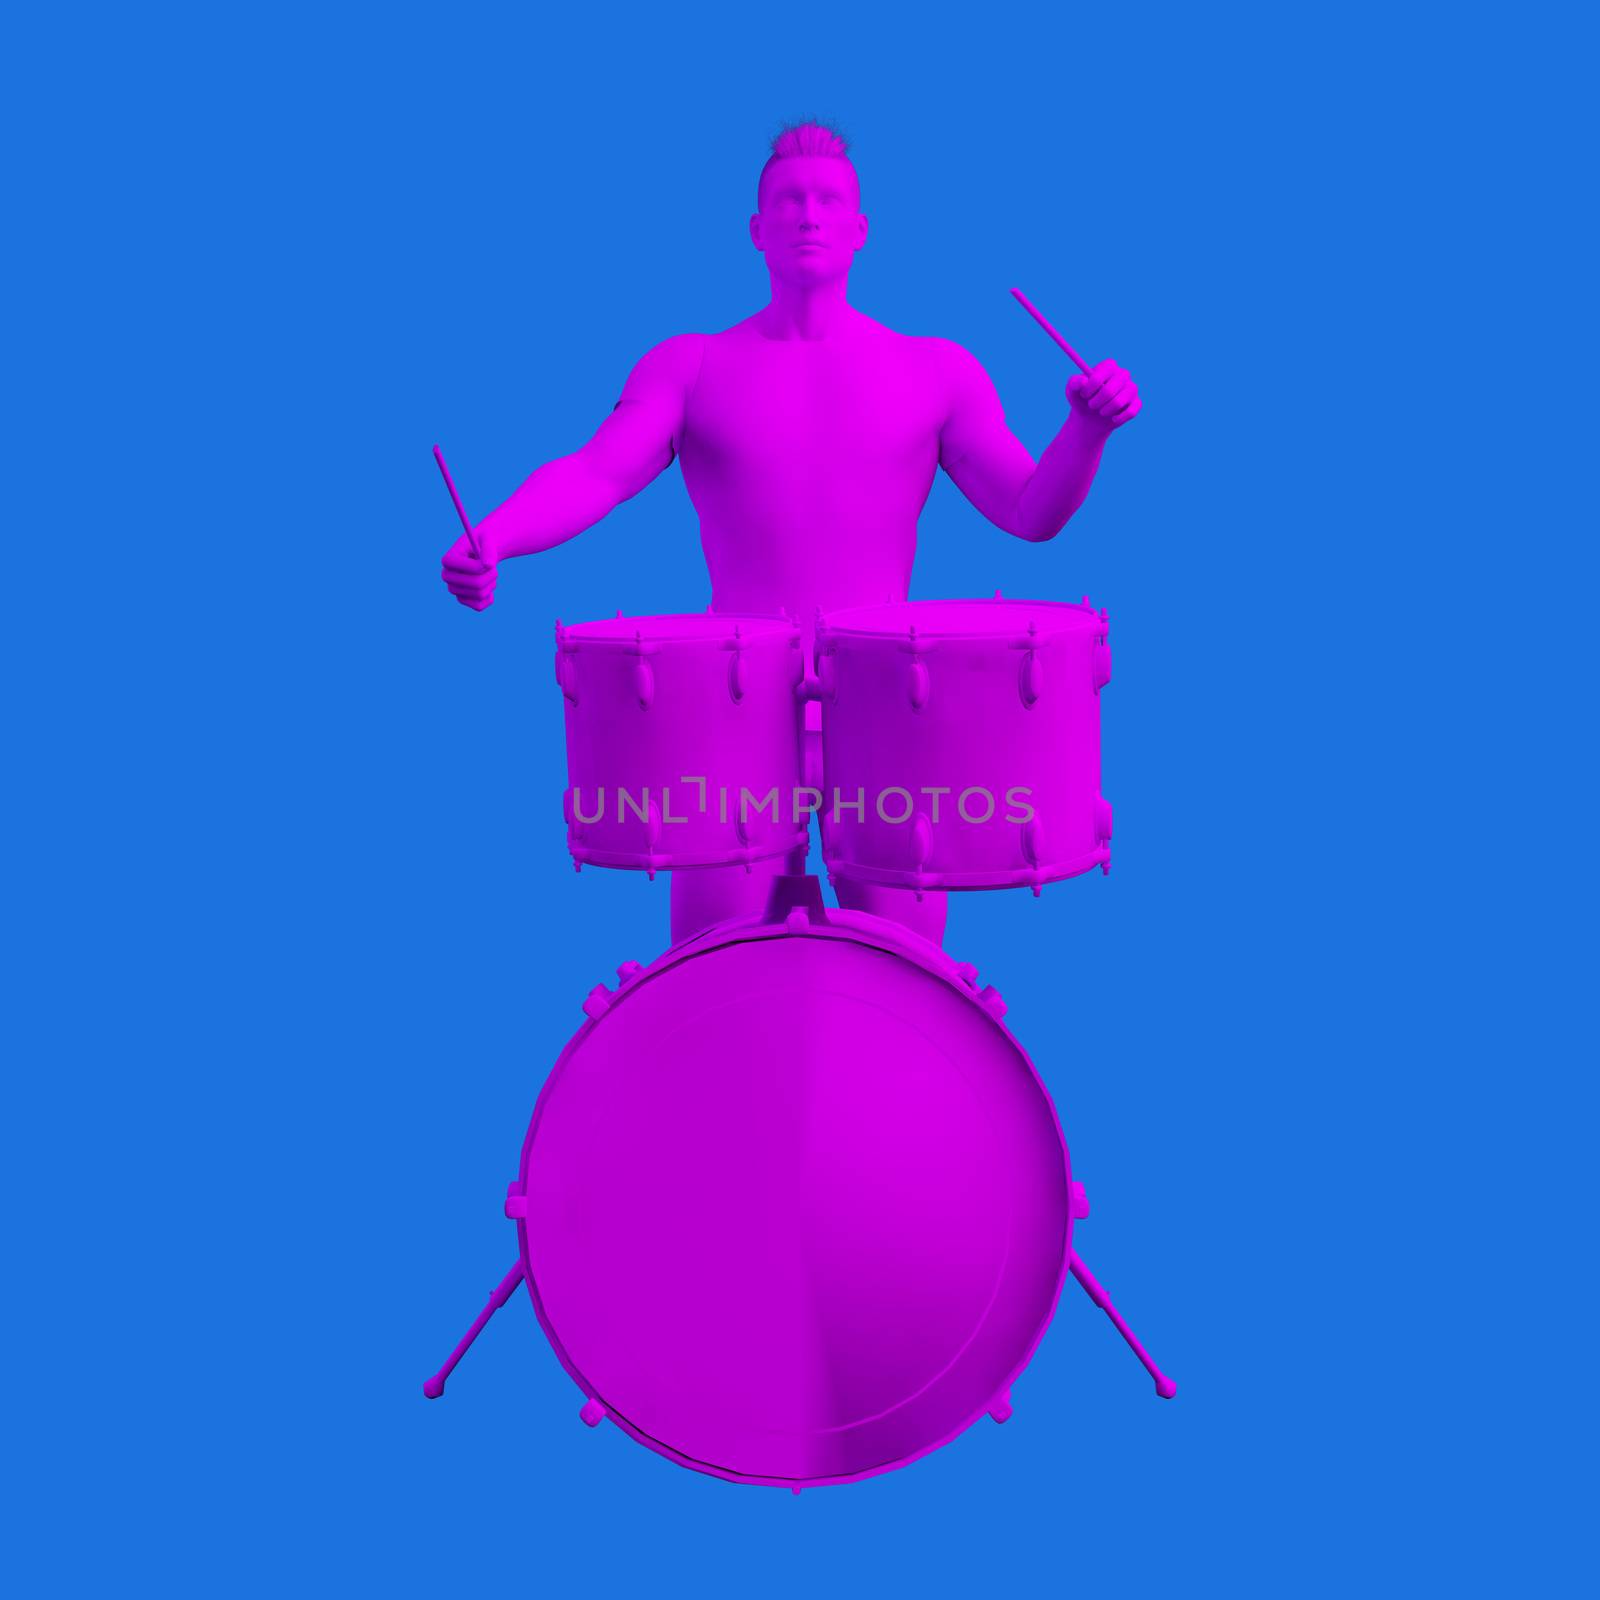 Drummer Drum Player Playing in Concert Concept